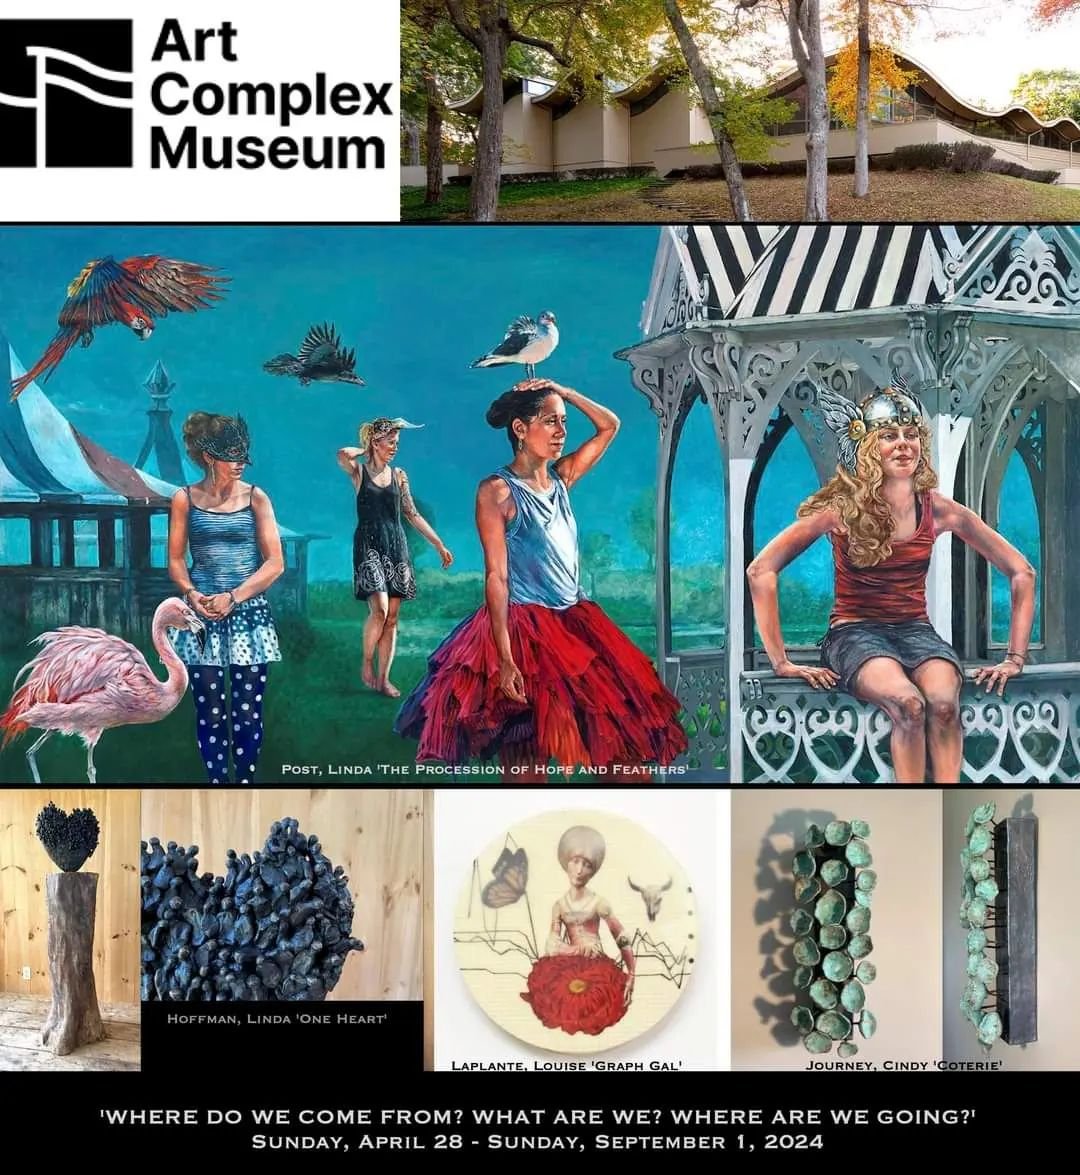 Delighted to have two works juried into this wonderful exhibition at the Art Complex Museum, in Duxbury Massachusetts.